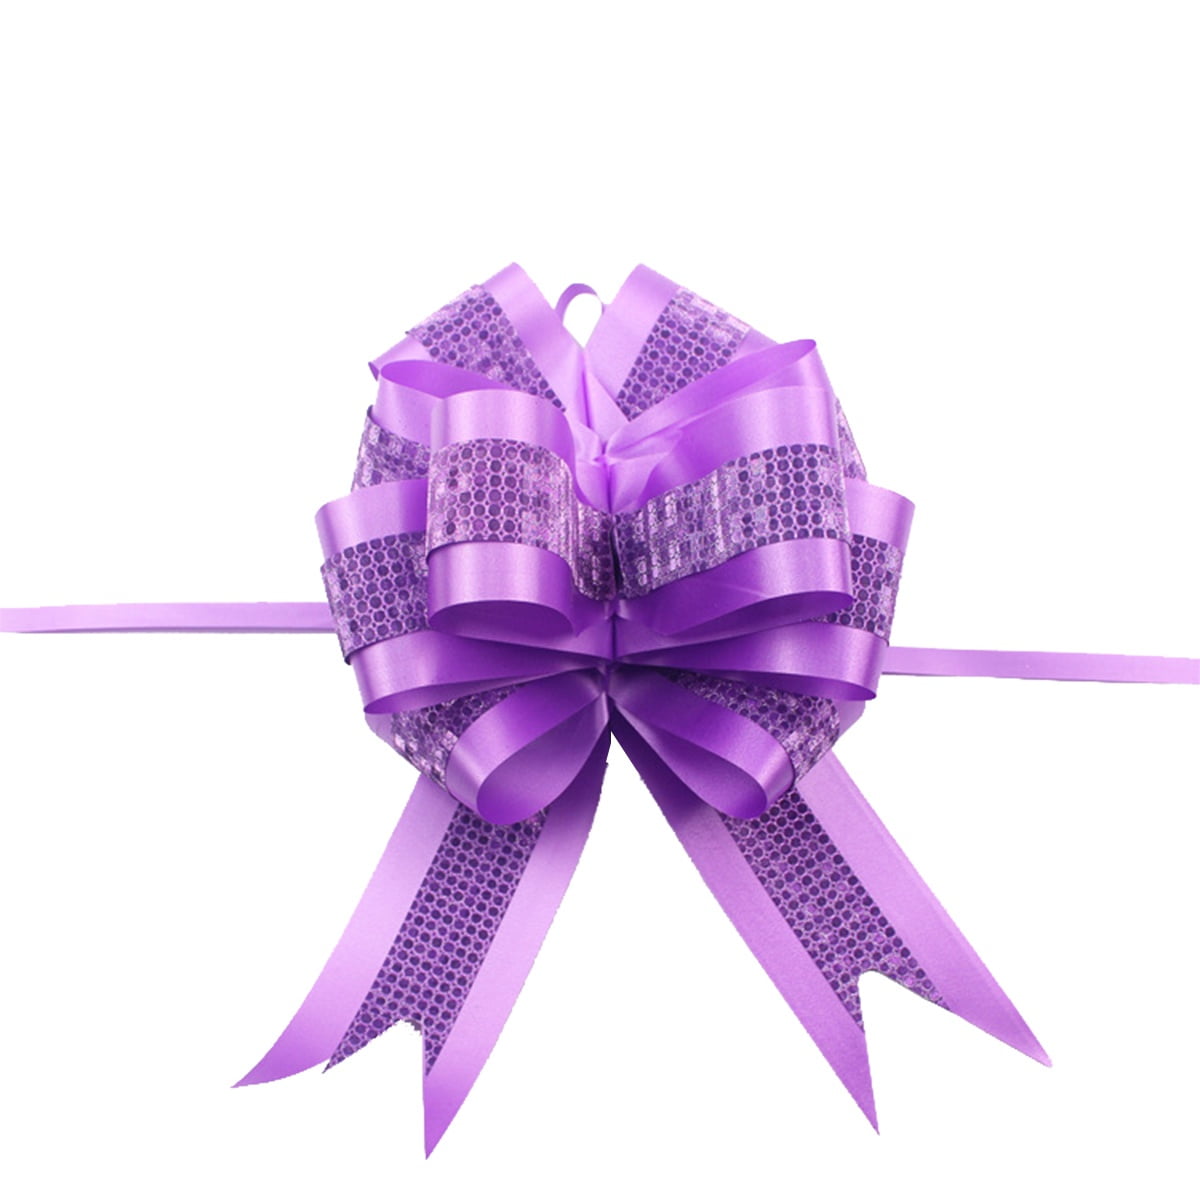 Purple and Gold Bows with Polka Dots - University Book Exchange